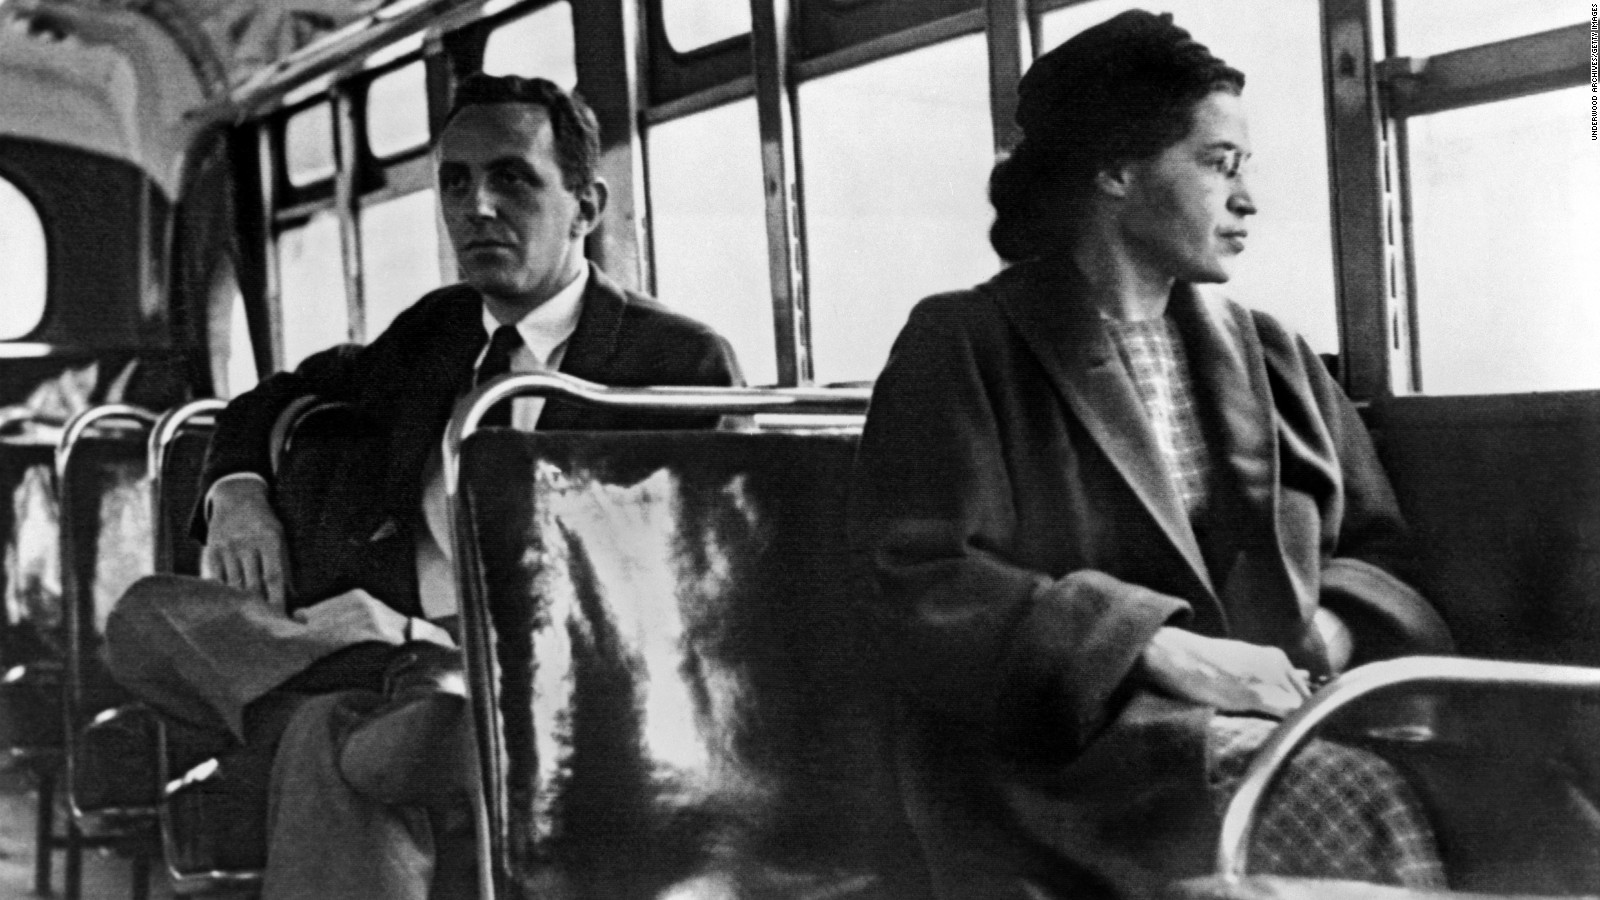 The legacy of Rosa Parks